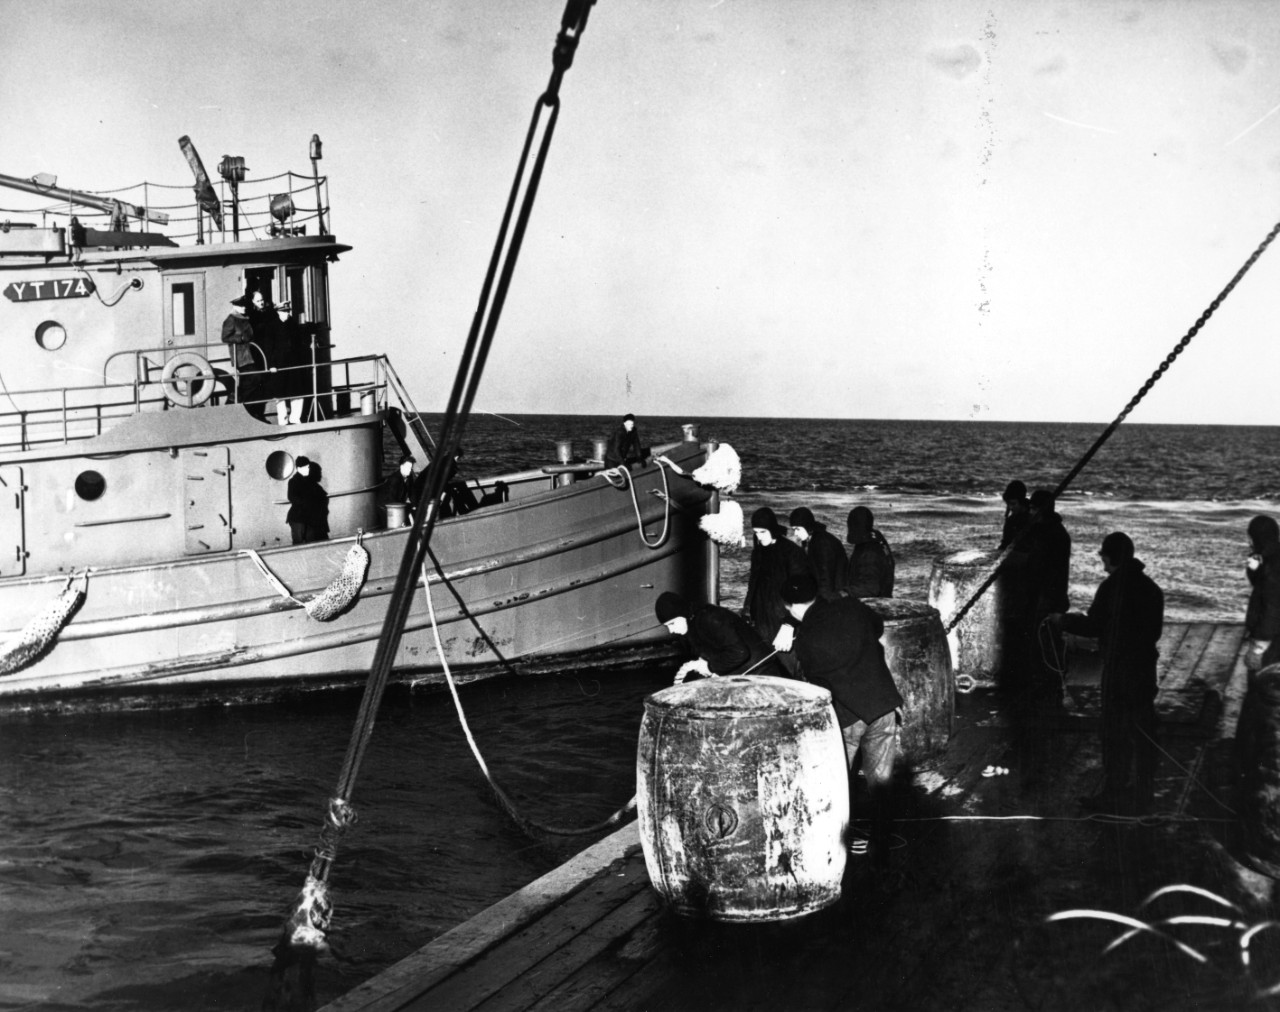 USS Allaquippa (YT-174) mooring to a barge, in Long Island Sound, during net-laying operations in January 1943. Note sailors' cold weather gear, buoys in foreground (on barge), ship's number board on deckhouse, and covered .30 caliber Lewis machine gun atop tug's pilot house.